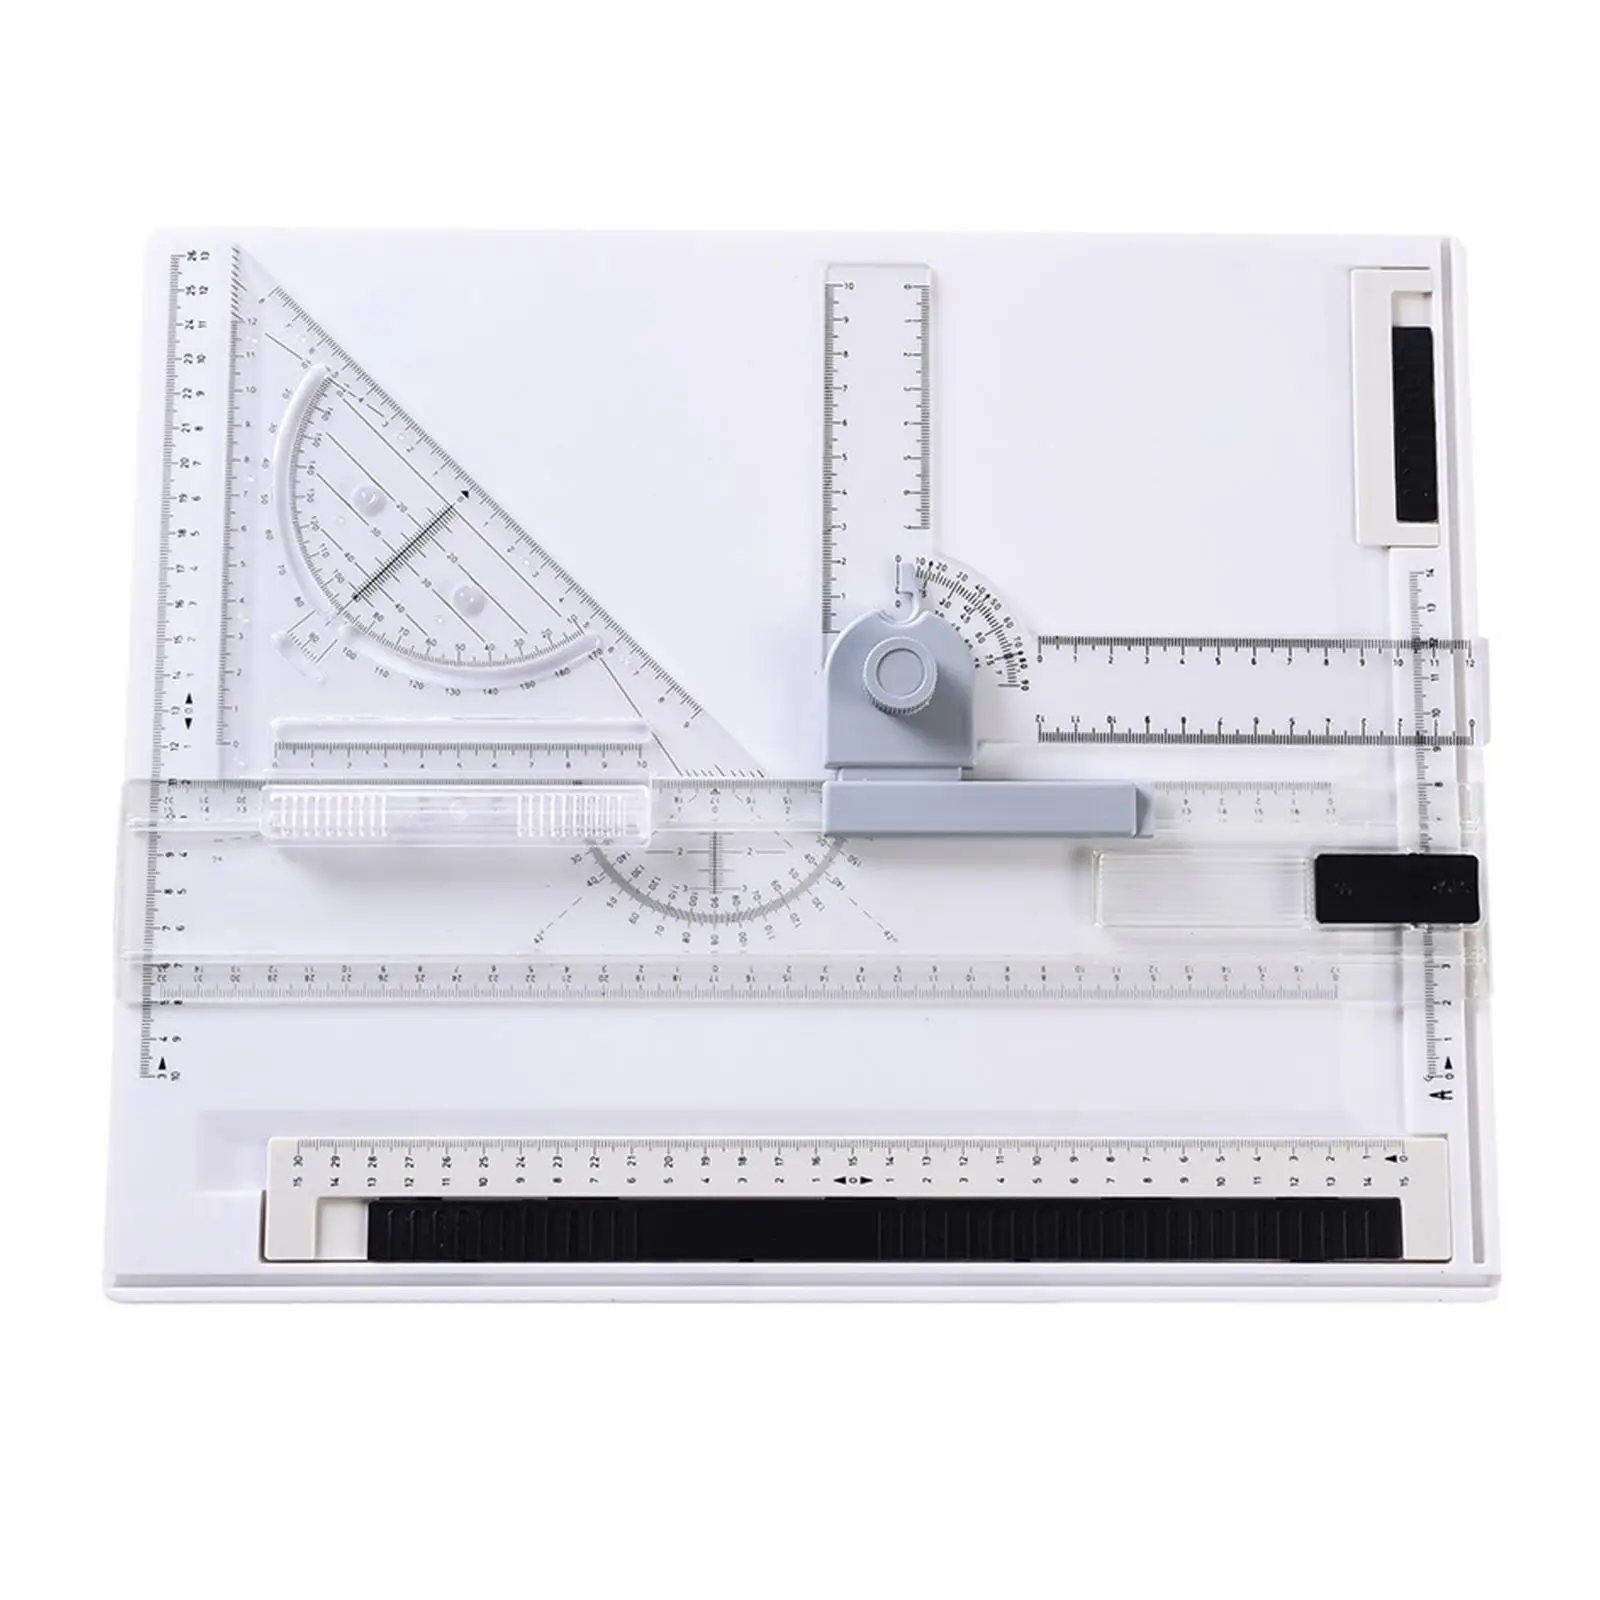 A4 Drawing Board Drafting Table with Parallel Motion Accessories Multifunctional Sliding Ruler Drawing Board Table for Designers